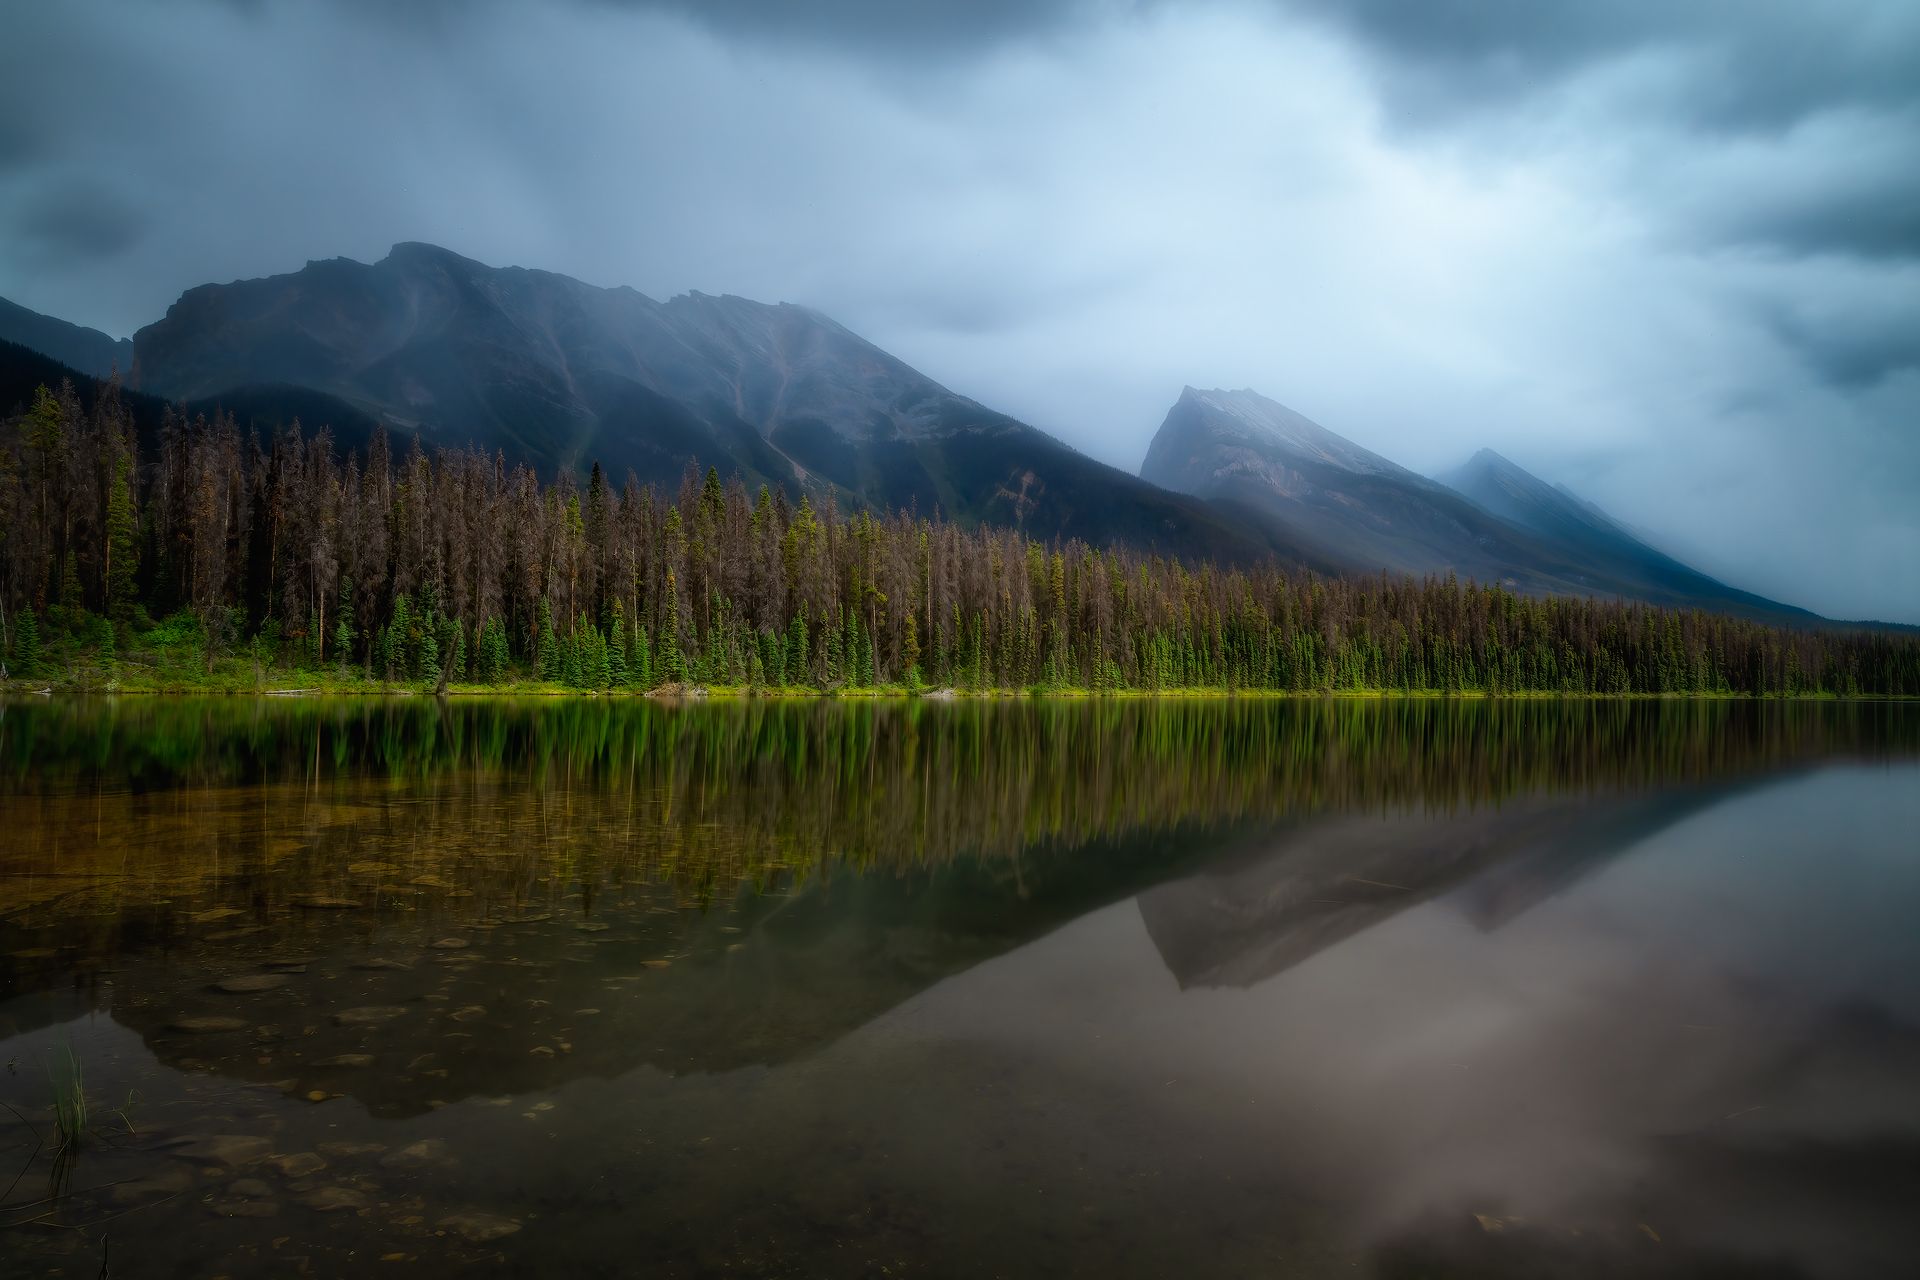 landscape, nature, reflection, water, lake, mirror, mountain, cloud, overcast, forest, Zhao Huapu